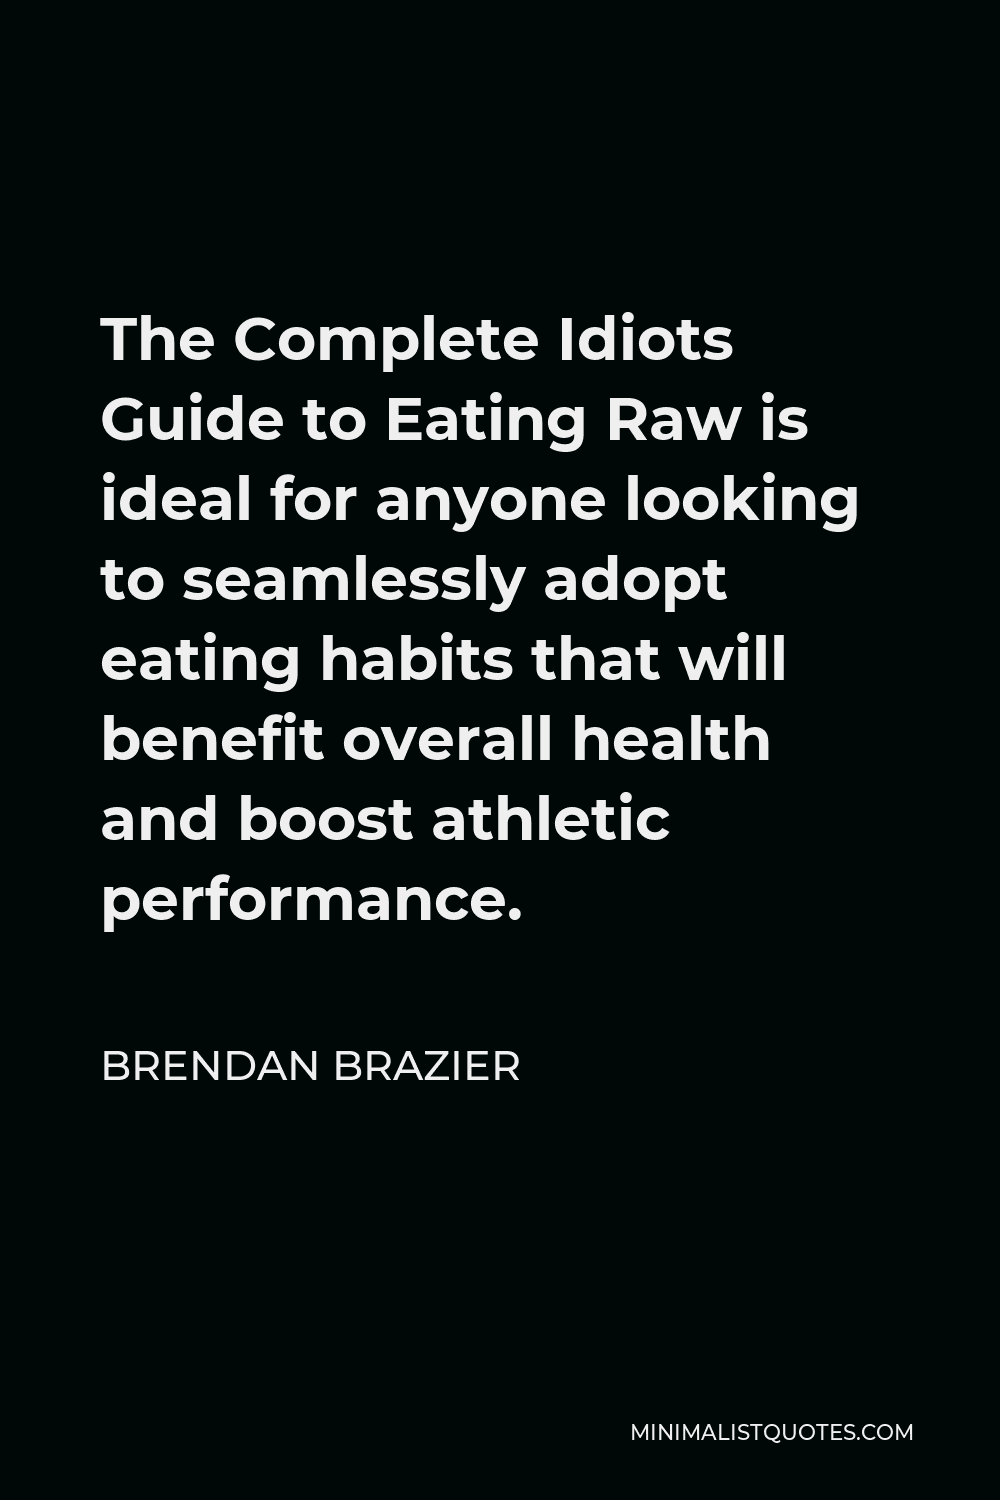 Brendan Brazier Quote - The Complete Idiots Guide to Eating Raw is ideal for anyone looking to seamlessly adopt eating habits that will benefit overall health and boost athletic performance.